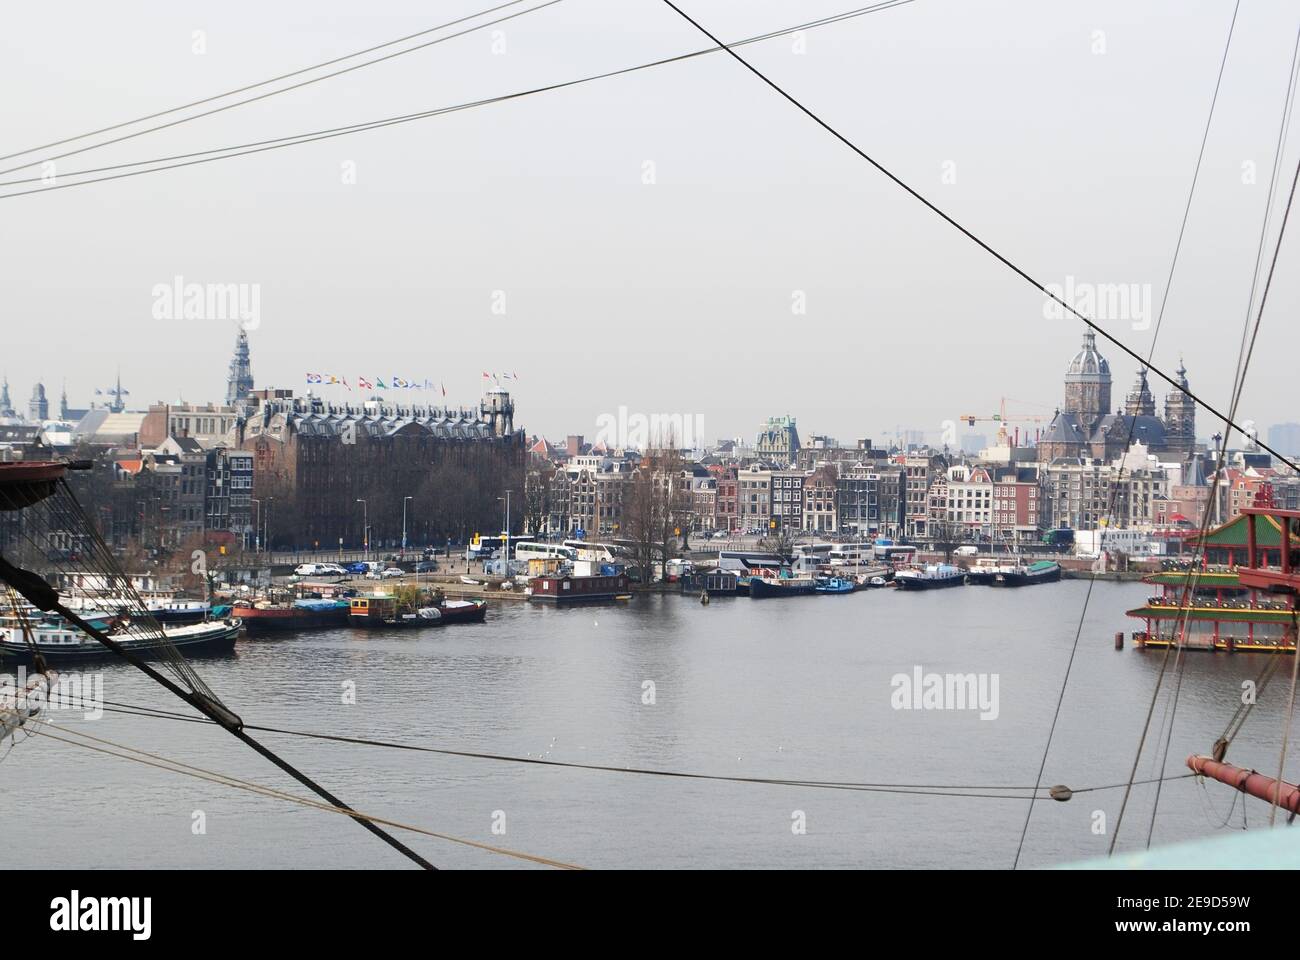 The view of some of Amsterdam's famous landmarks including the Basilica of Saint Nicholas. Stock Photo